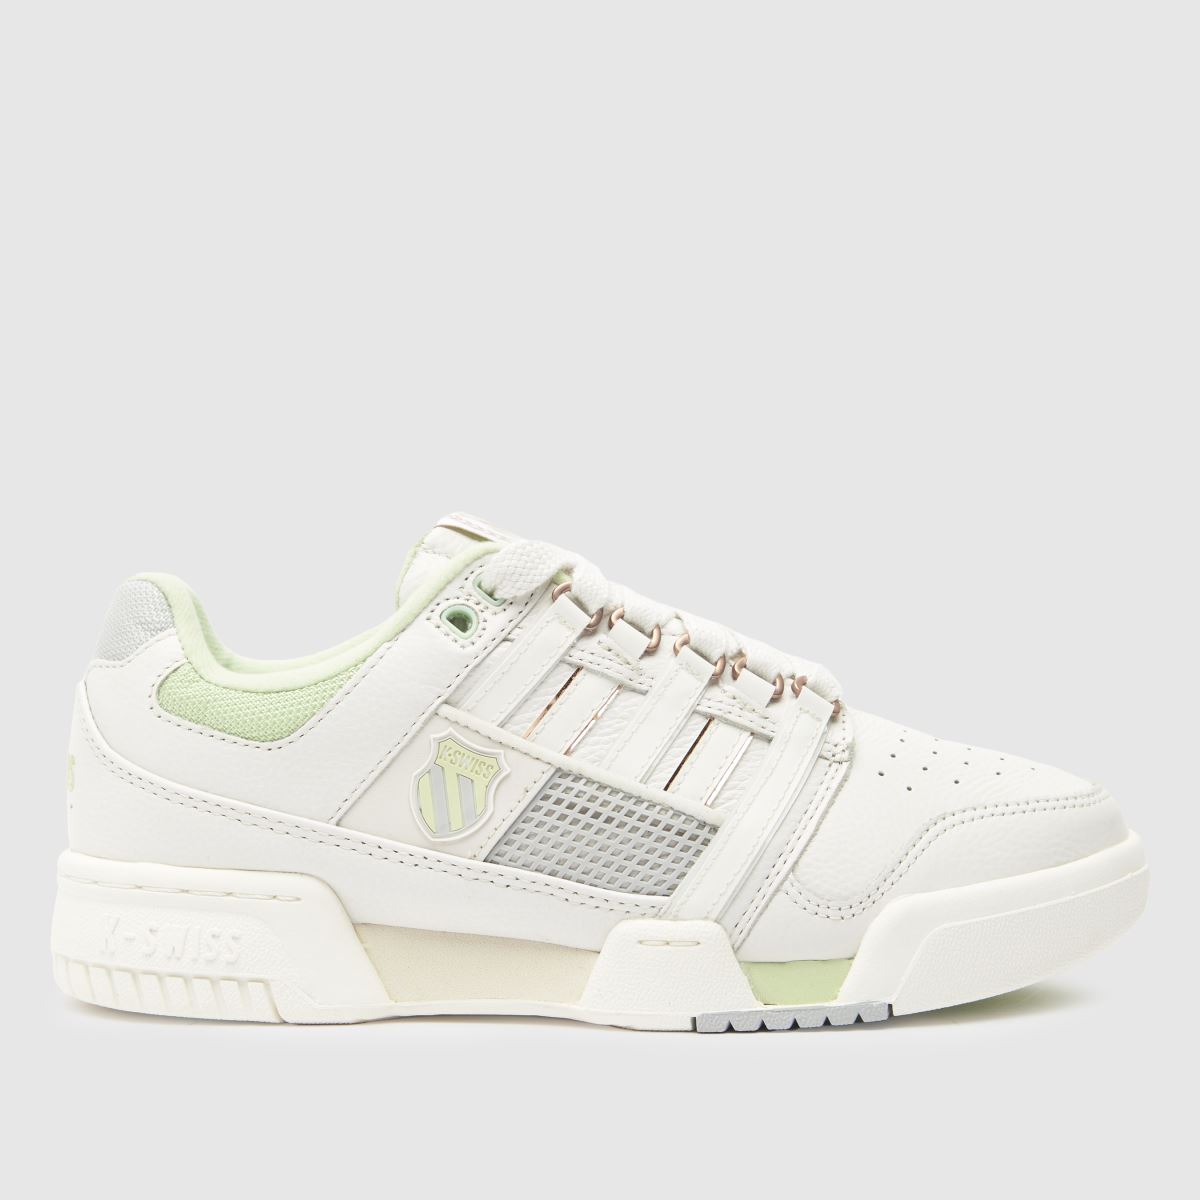 K-SWISS gstaad gold trainers in white & green